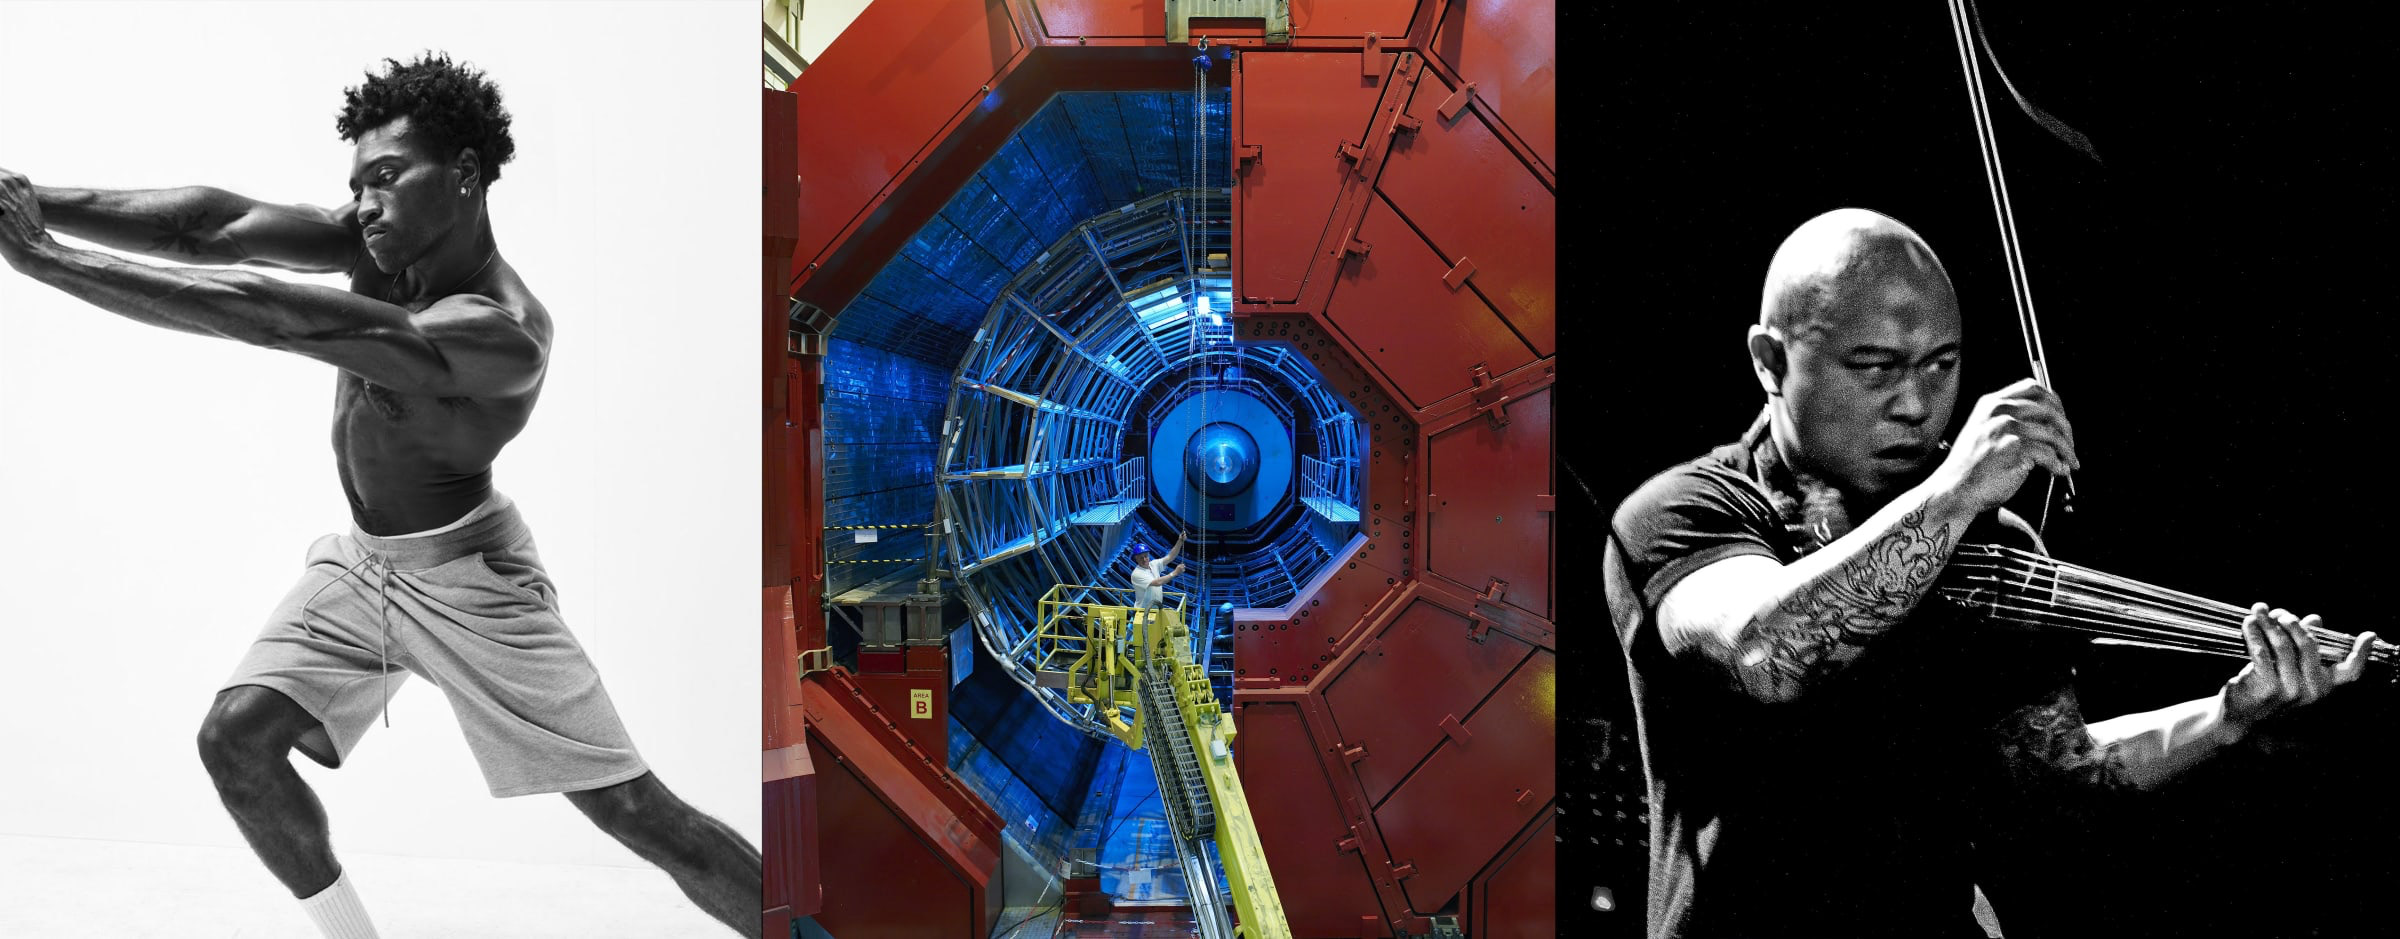 An experimental performance April 8 will combine dance, music and video footage from CERN that has been mathematically manipulated. Image credits, left to right: Mario Sorrenti, CERN, Max Sequeira.